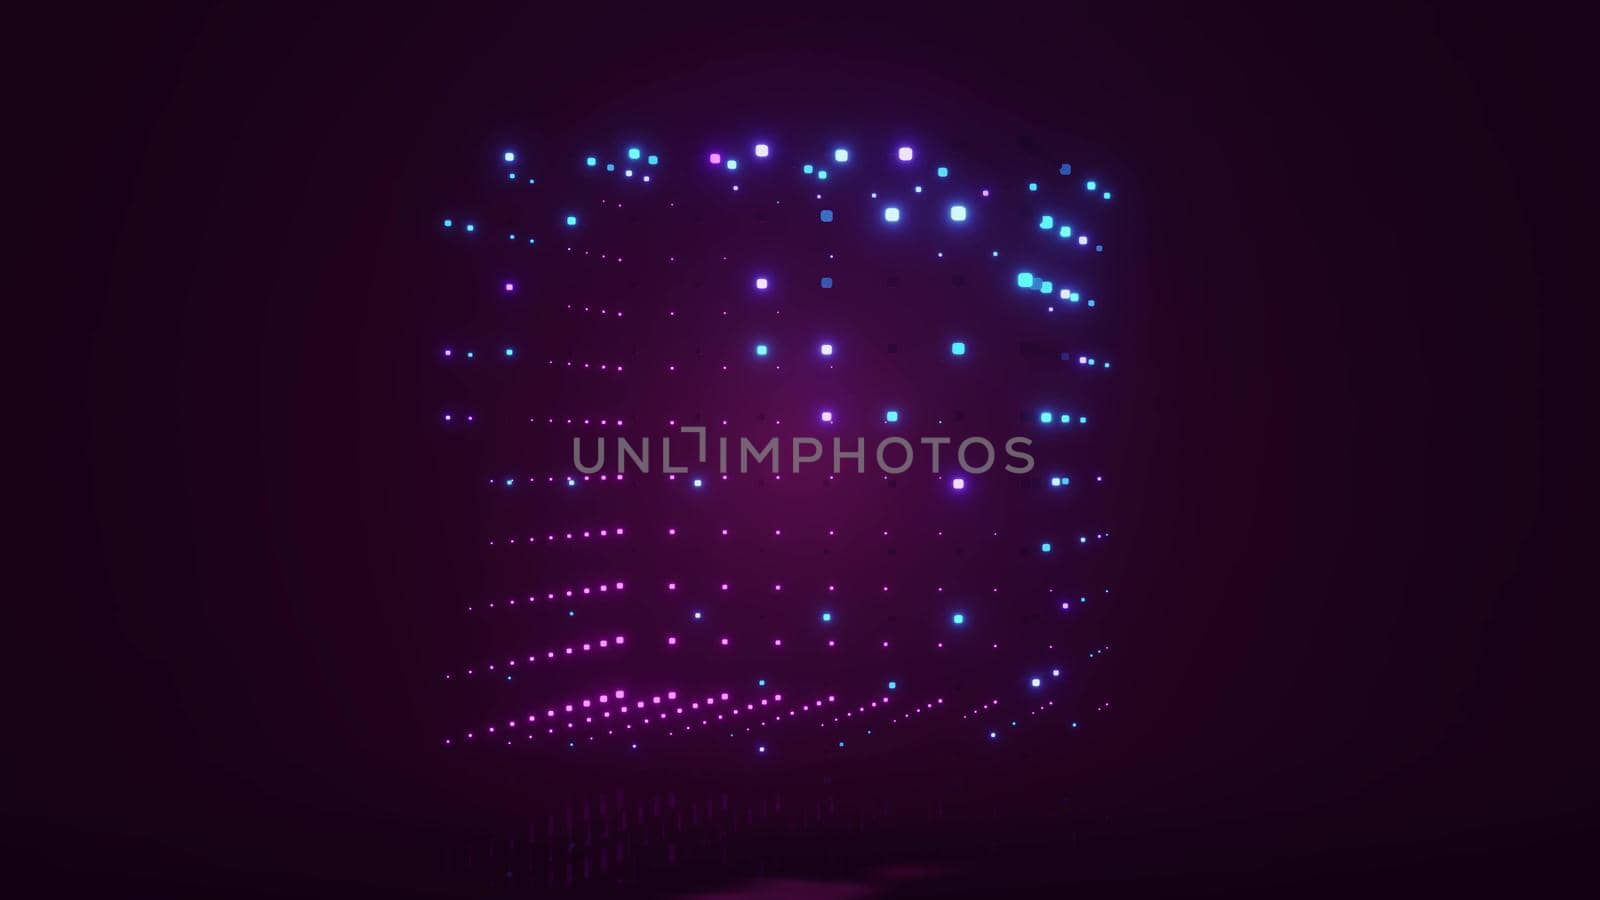 Dark 3d illustration of square shaped pattern made of small glowing purple cubes in 4K UHD quality